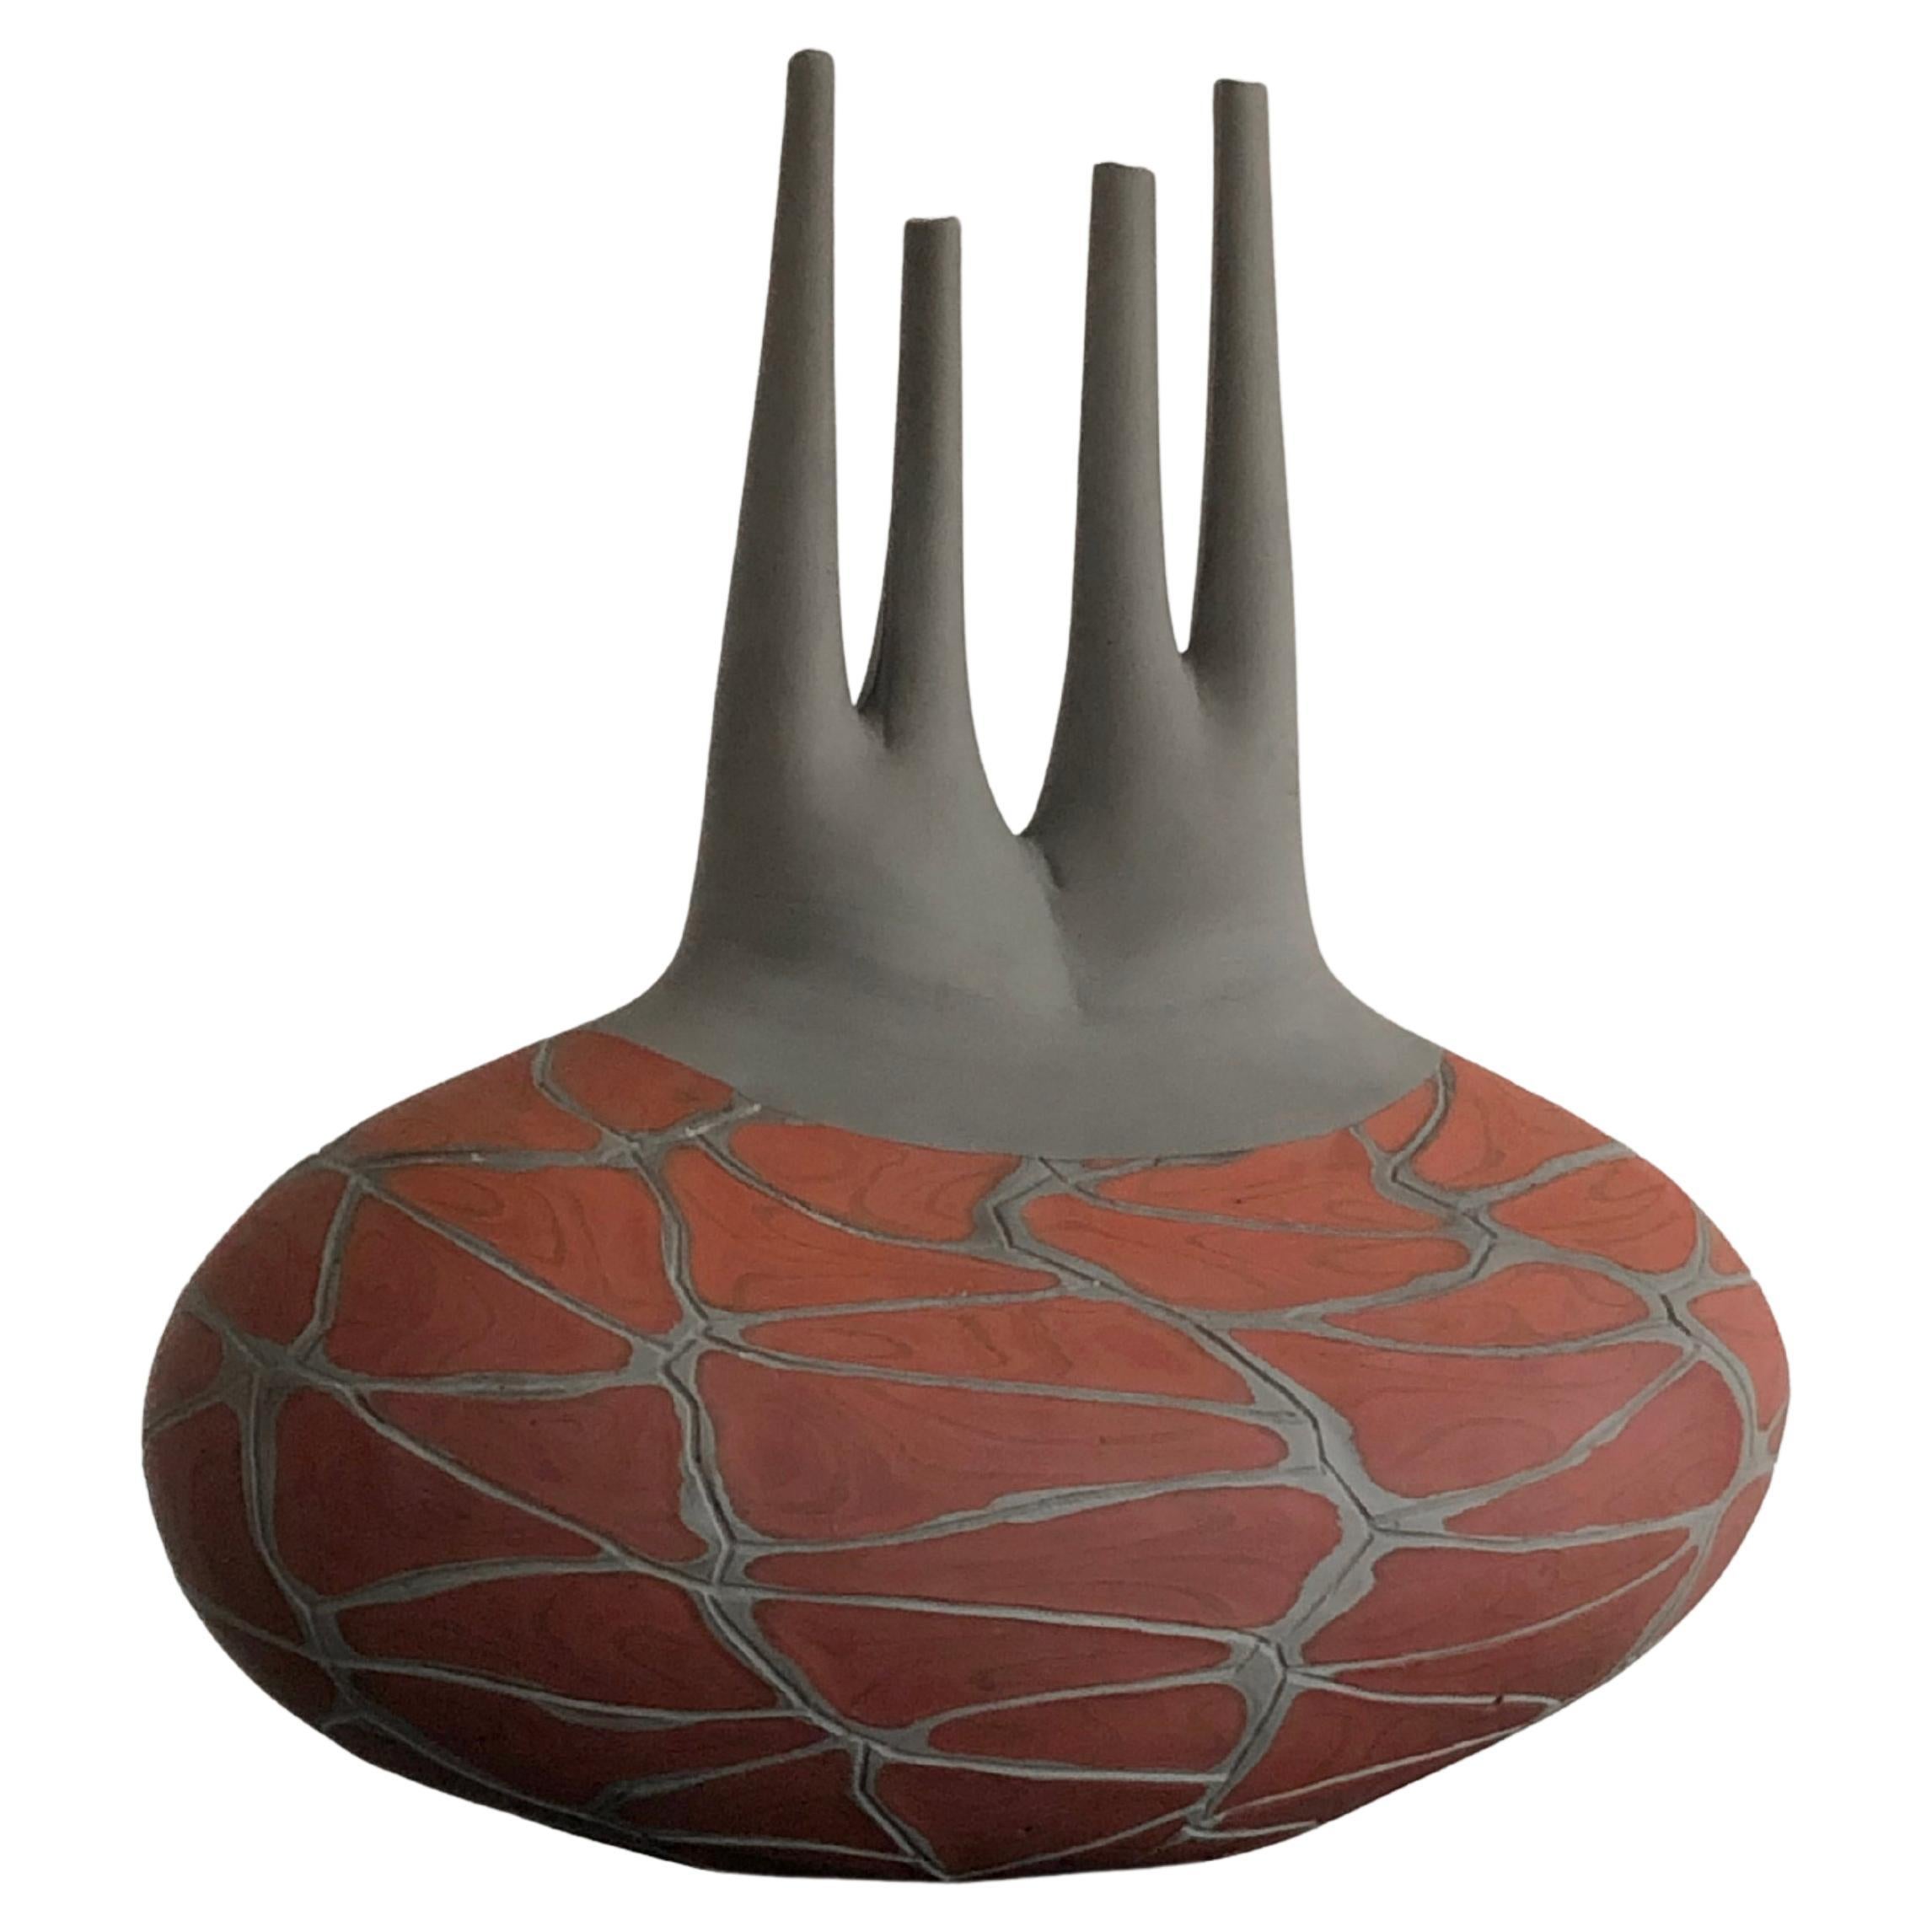 A SCULPTURAL BLOWN GLASS VASE, by DAVIDE SALVADORE, MURANO, Italy 2000. For Sale